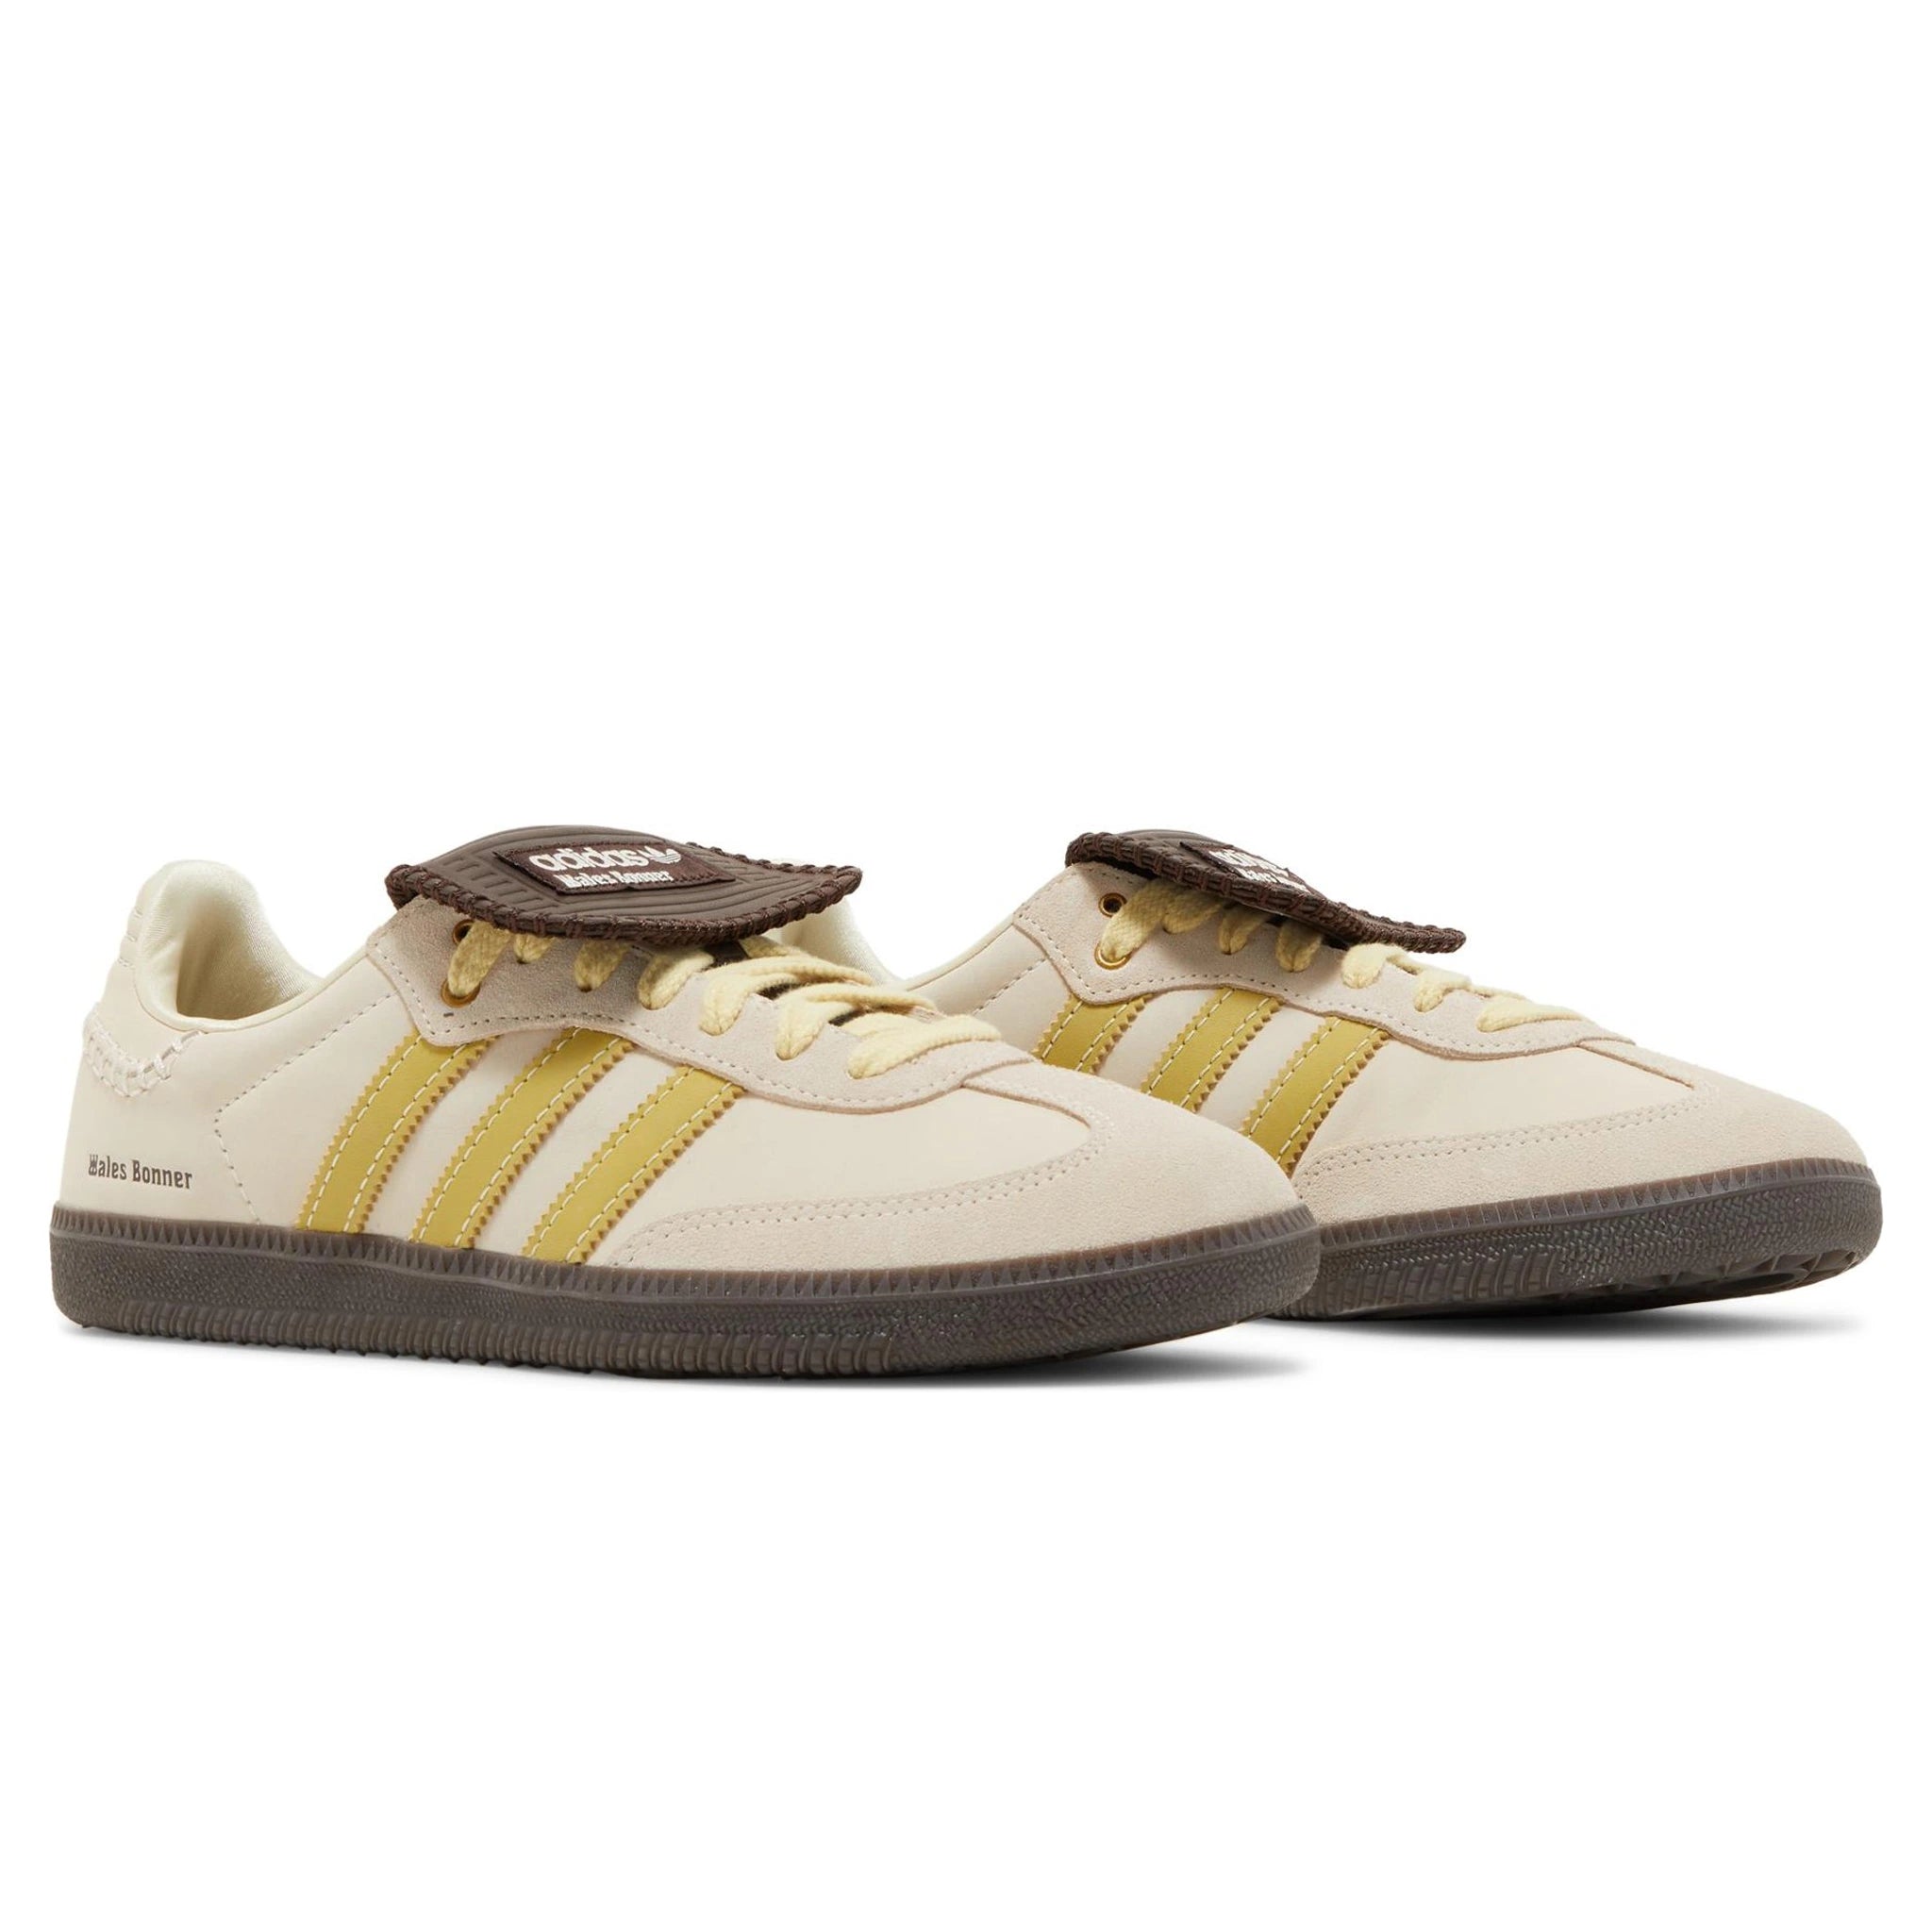 Front side view of Adidas Samba Wales Bonner Beige Yellow ID0217